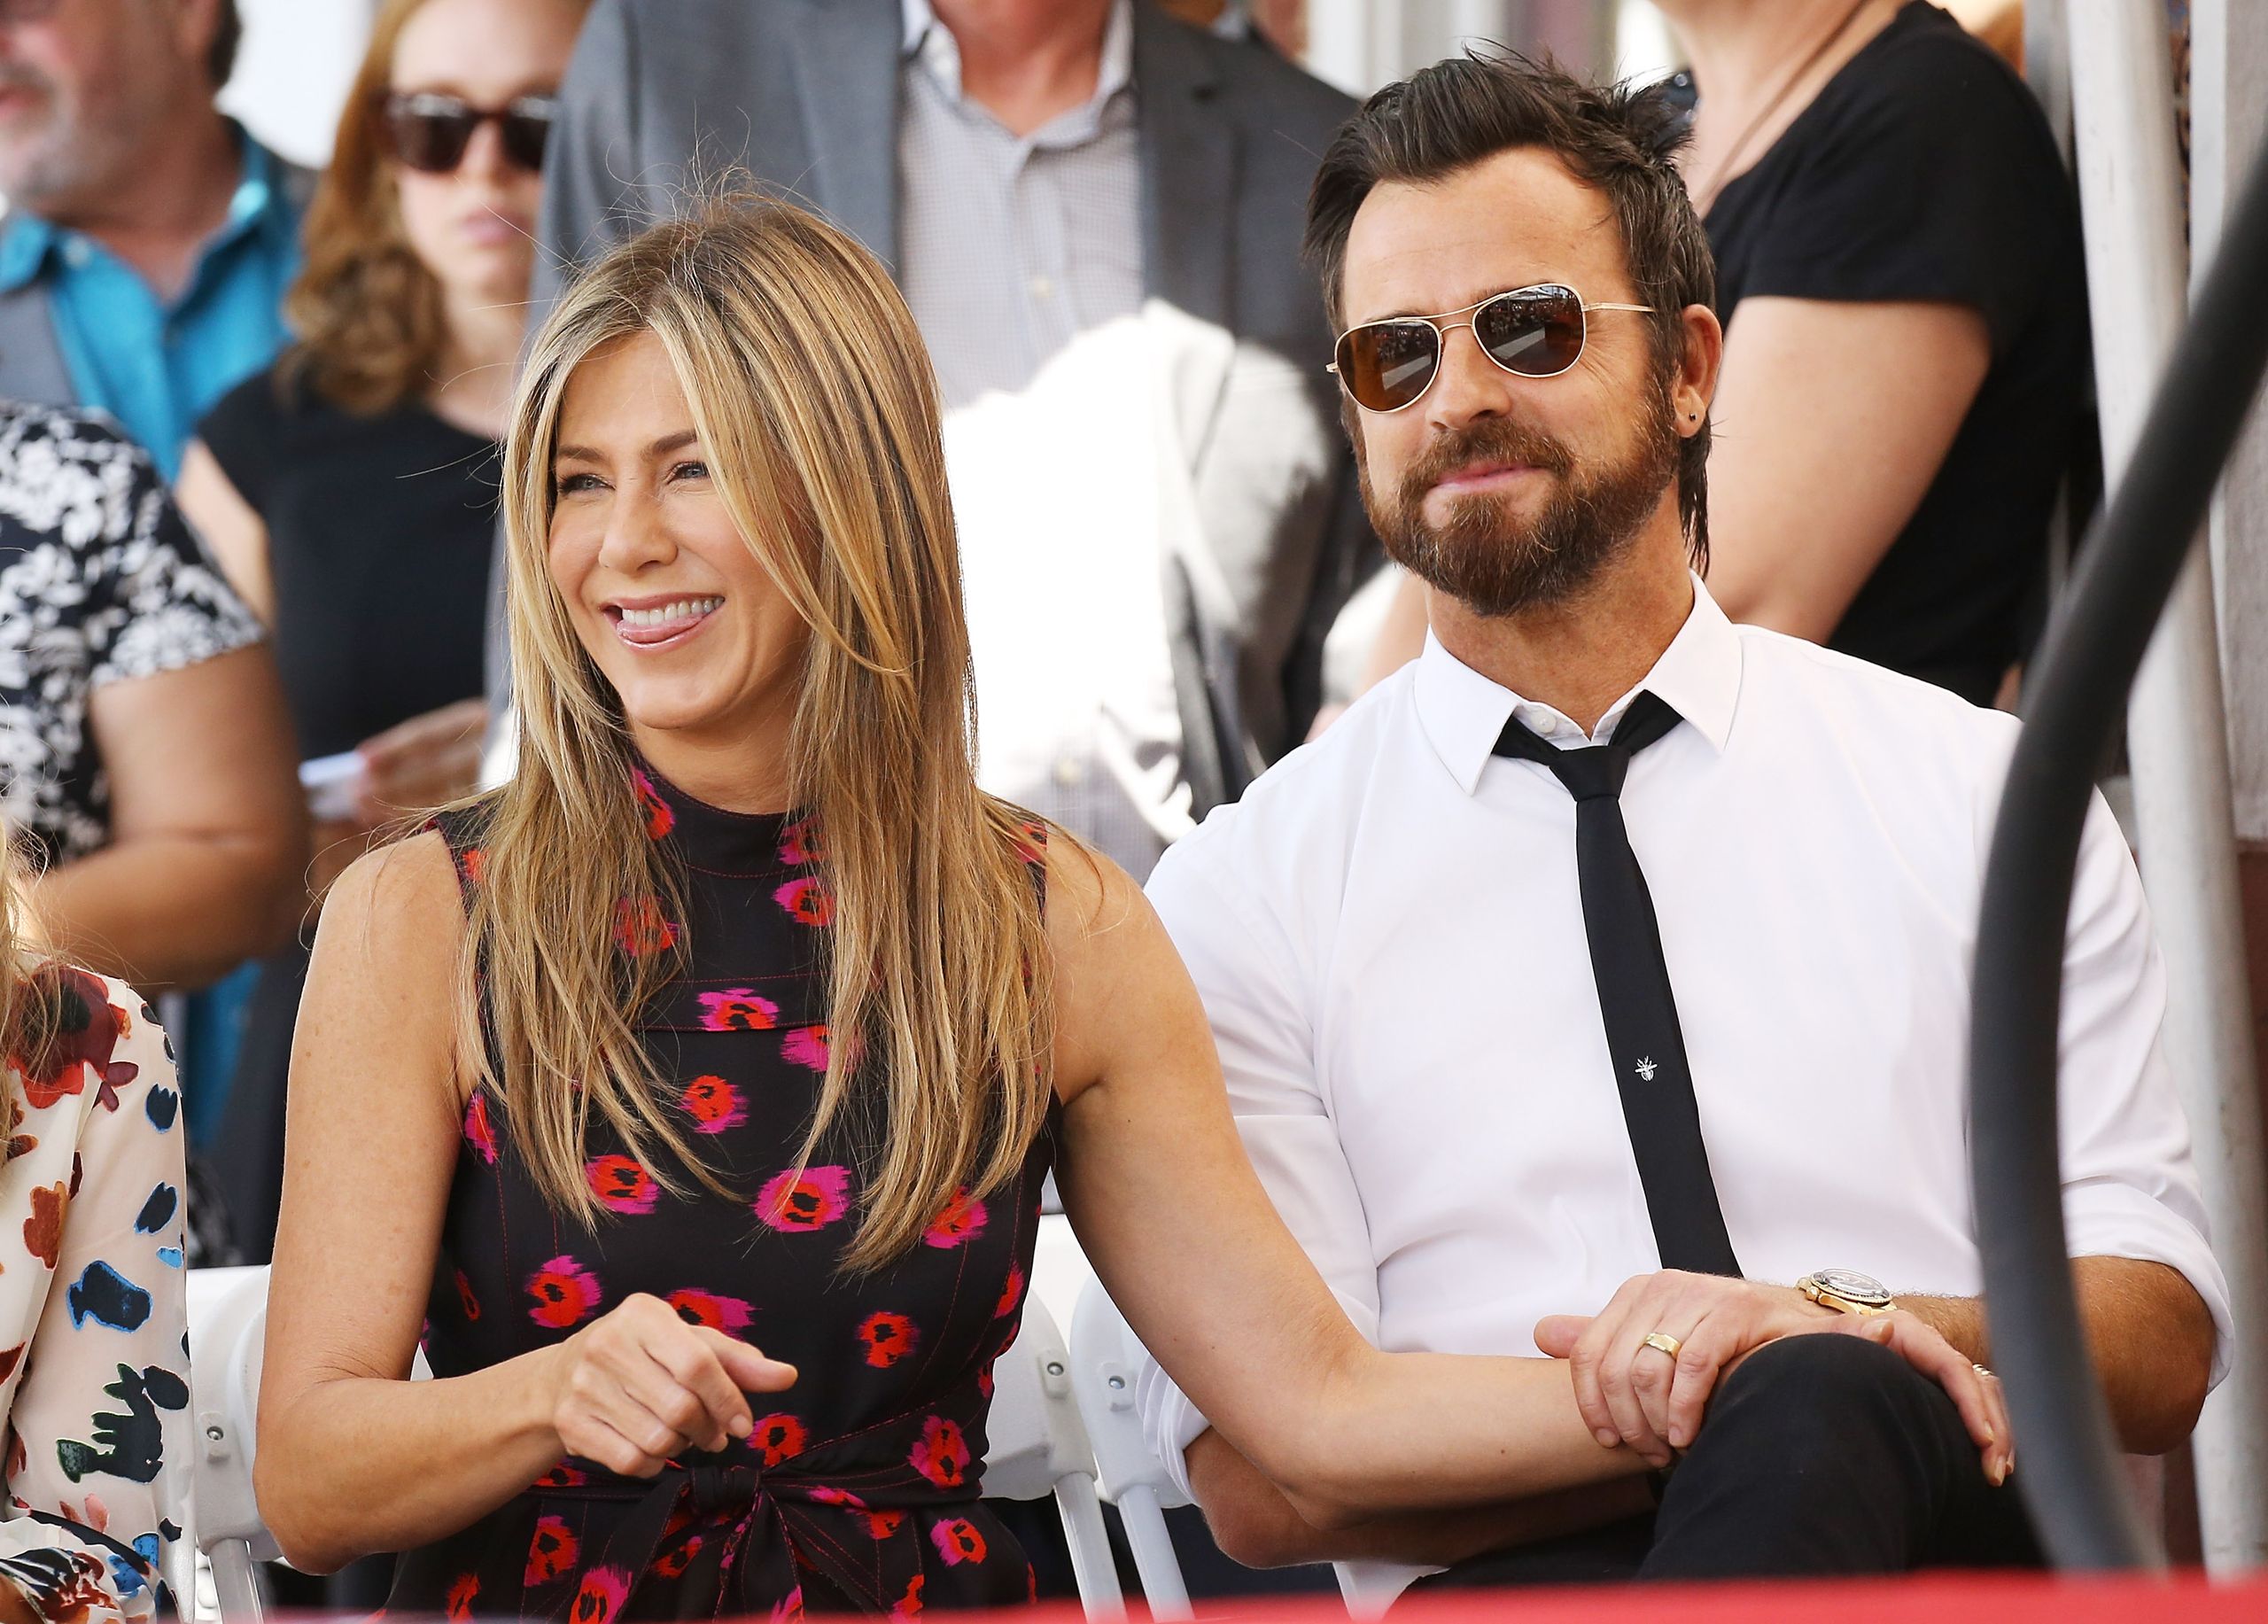 https://hips.hearstapps.com/hmg-prod.s3.amazonaws.com/images/jennifer-aniston-and-justin-theroux-attend-the-ceremony-news-photo-1575039680.jpg?resize=2560:*